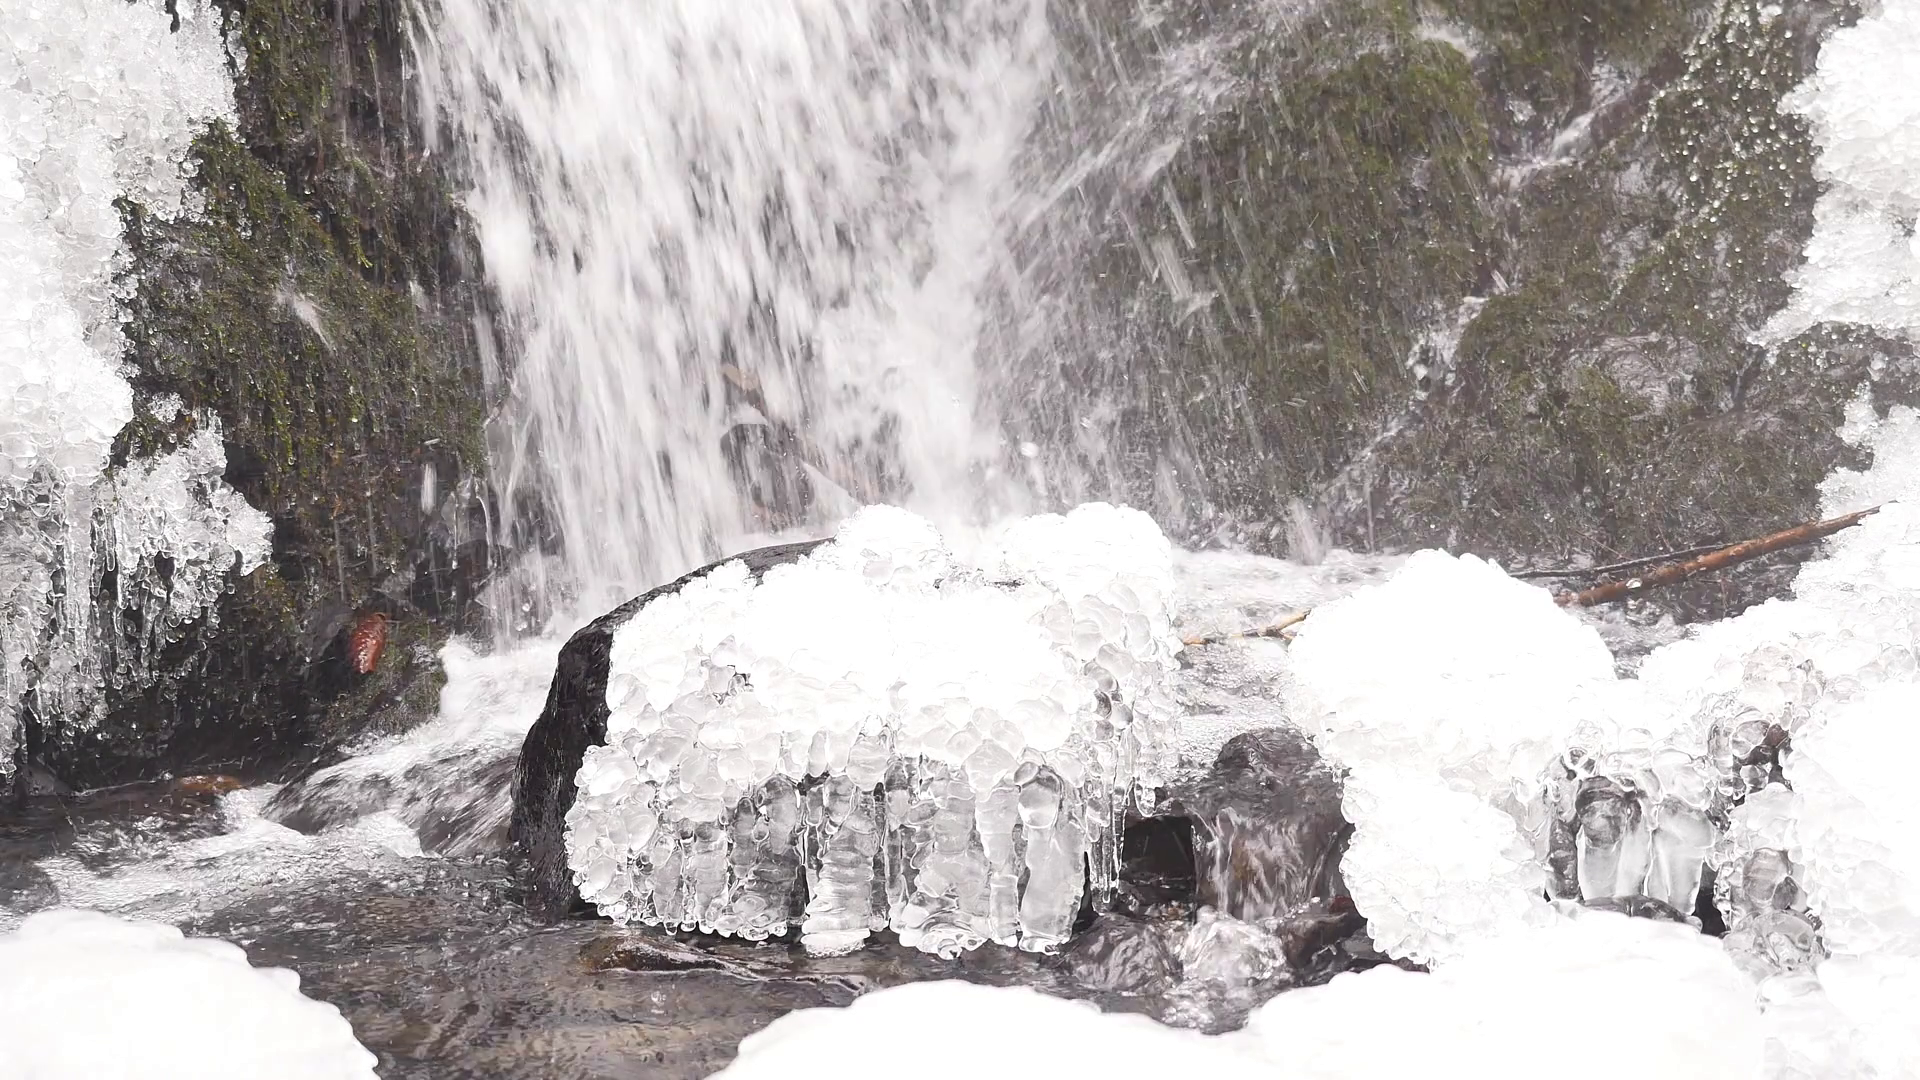 Iciciles bellow waterfall. Snowy and icy stones and boulders with ...